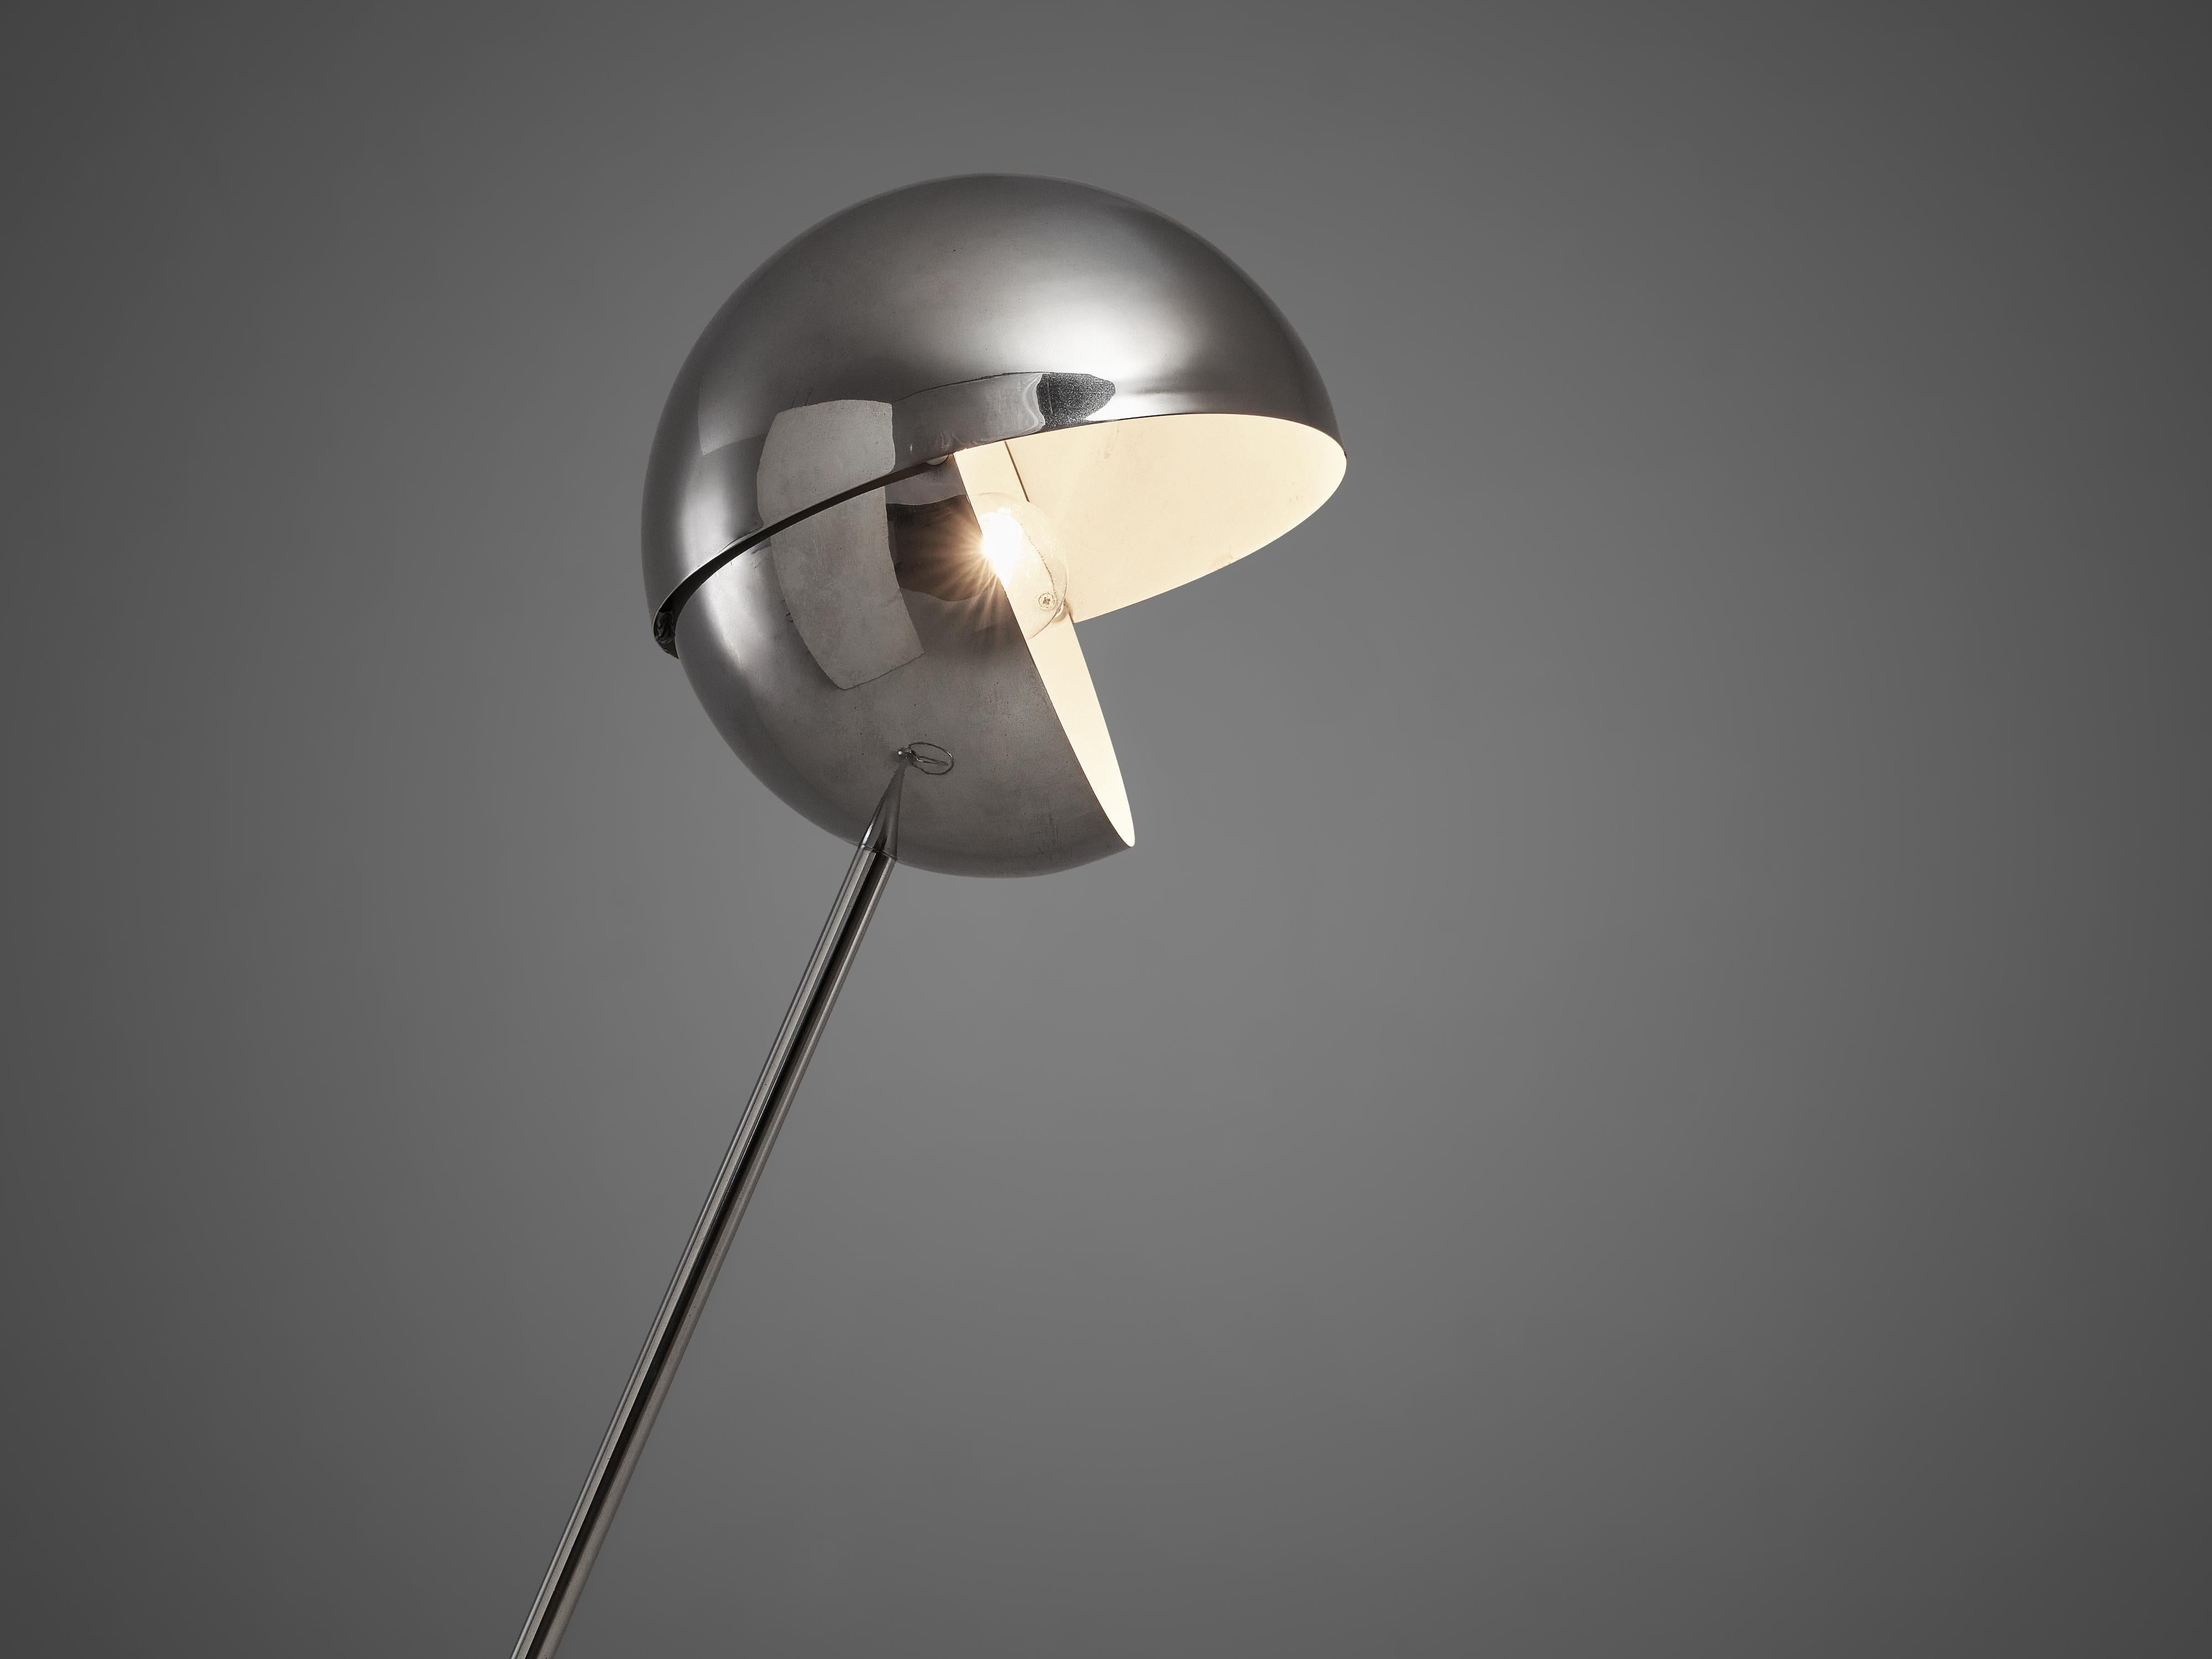 Mid-Century Modern Paolo Tilche Adjustable Floor Lamp Model 3S in Chrome-Plated Metal